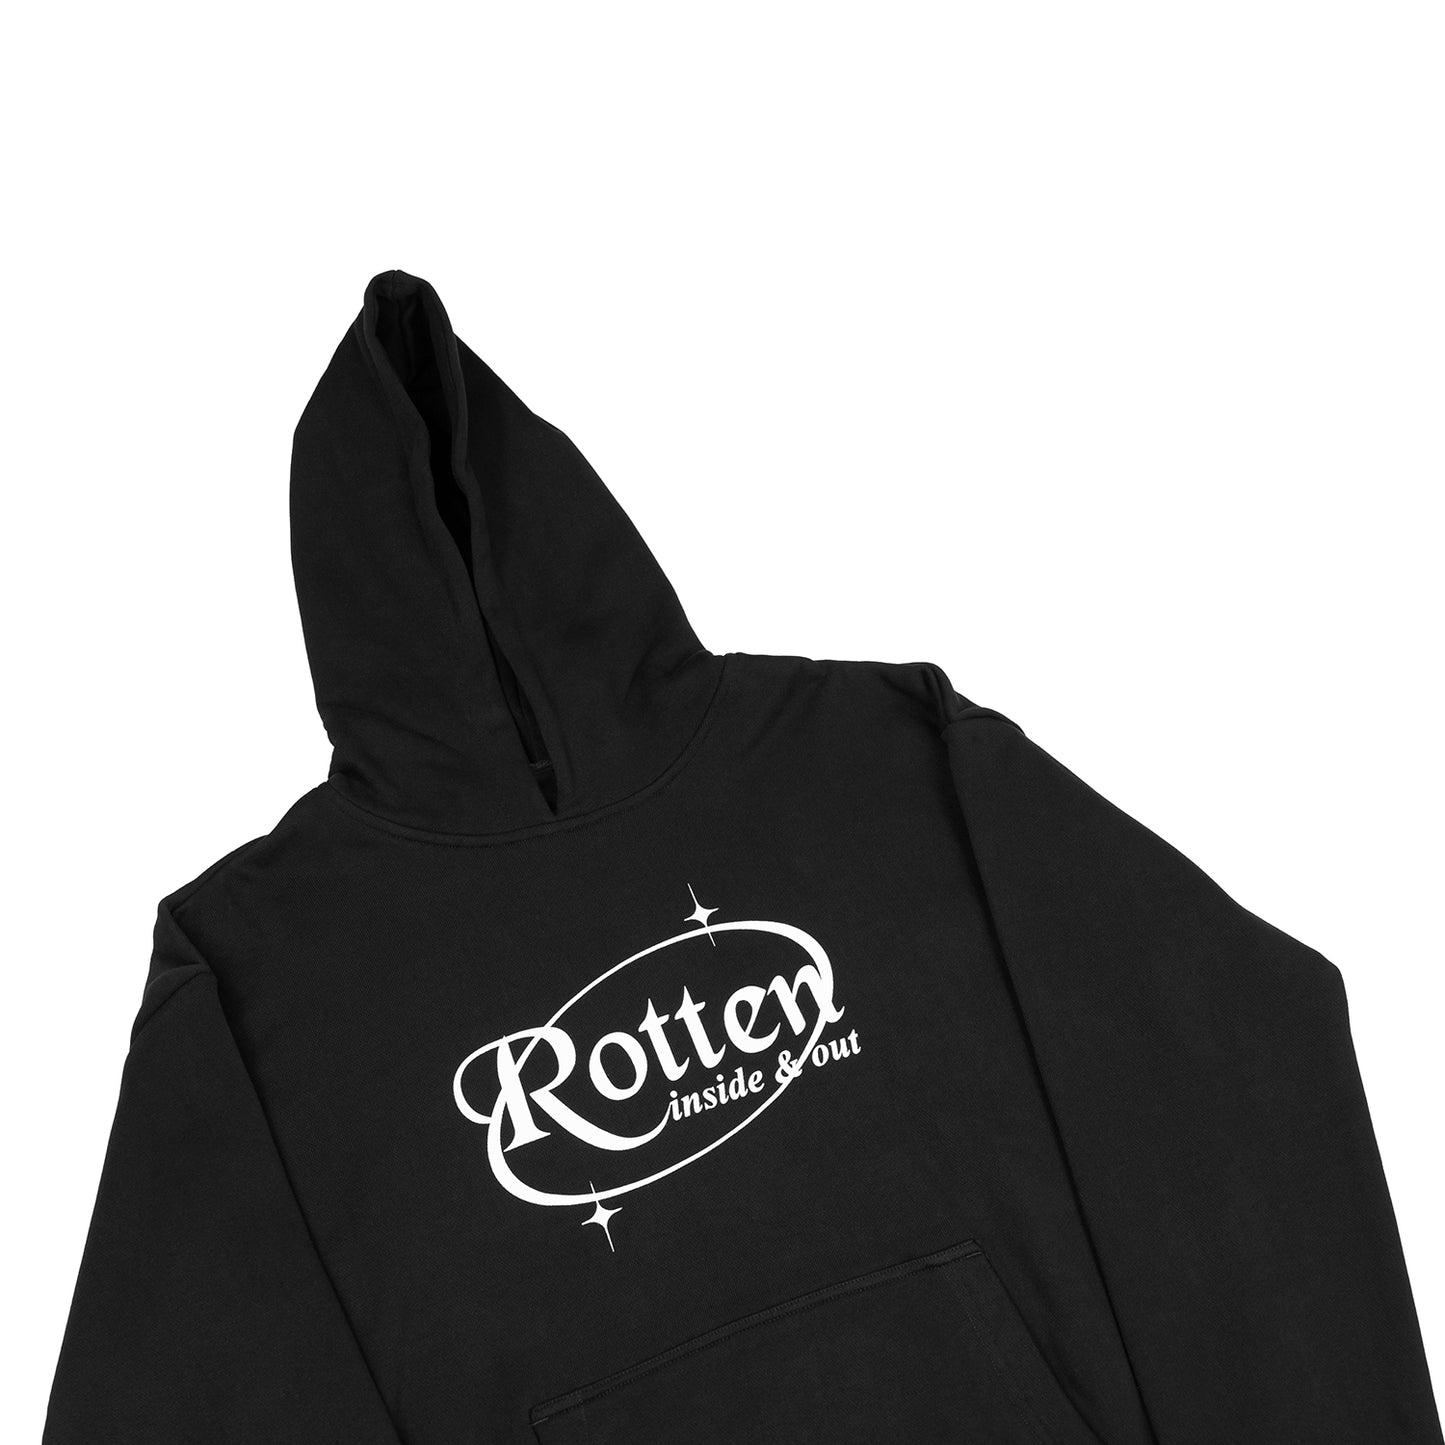 Rotten inside & out hoodie